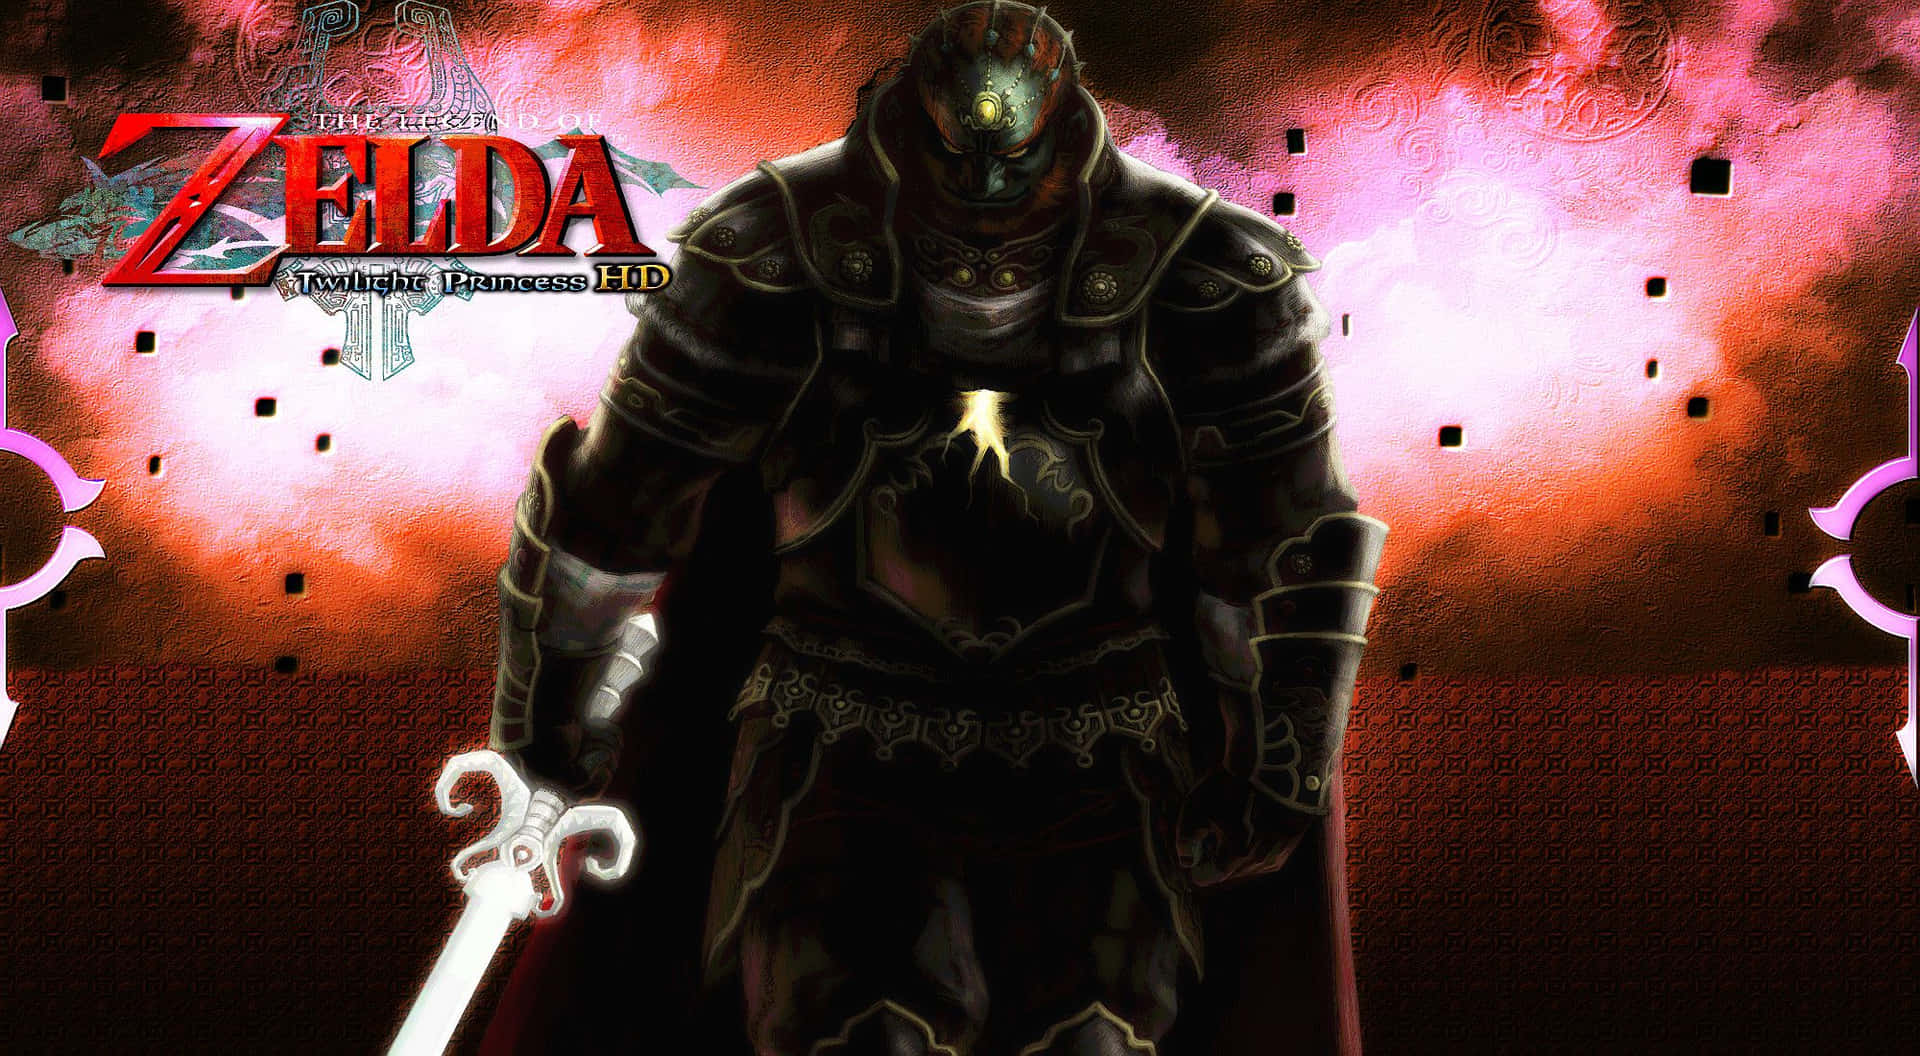 The Mighty Ganondorf - Supreme Power in a Mysterious World Wallpaper